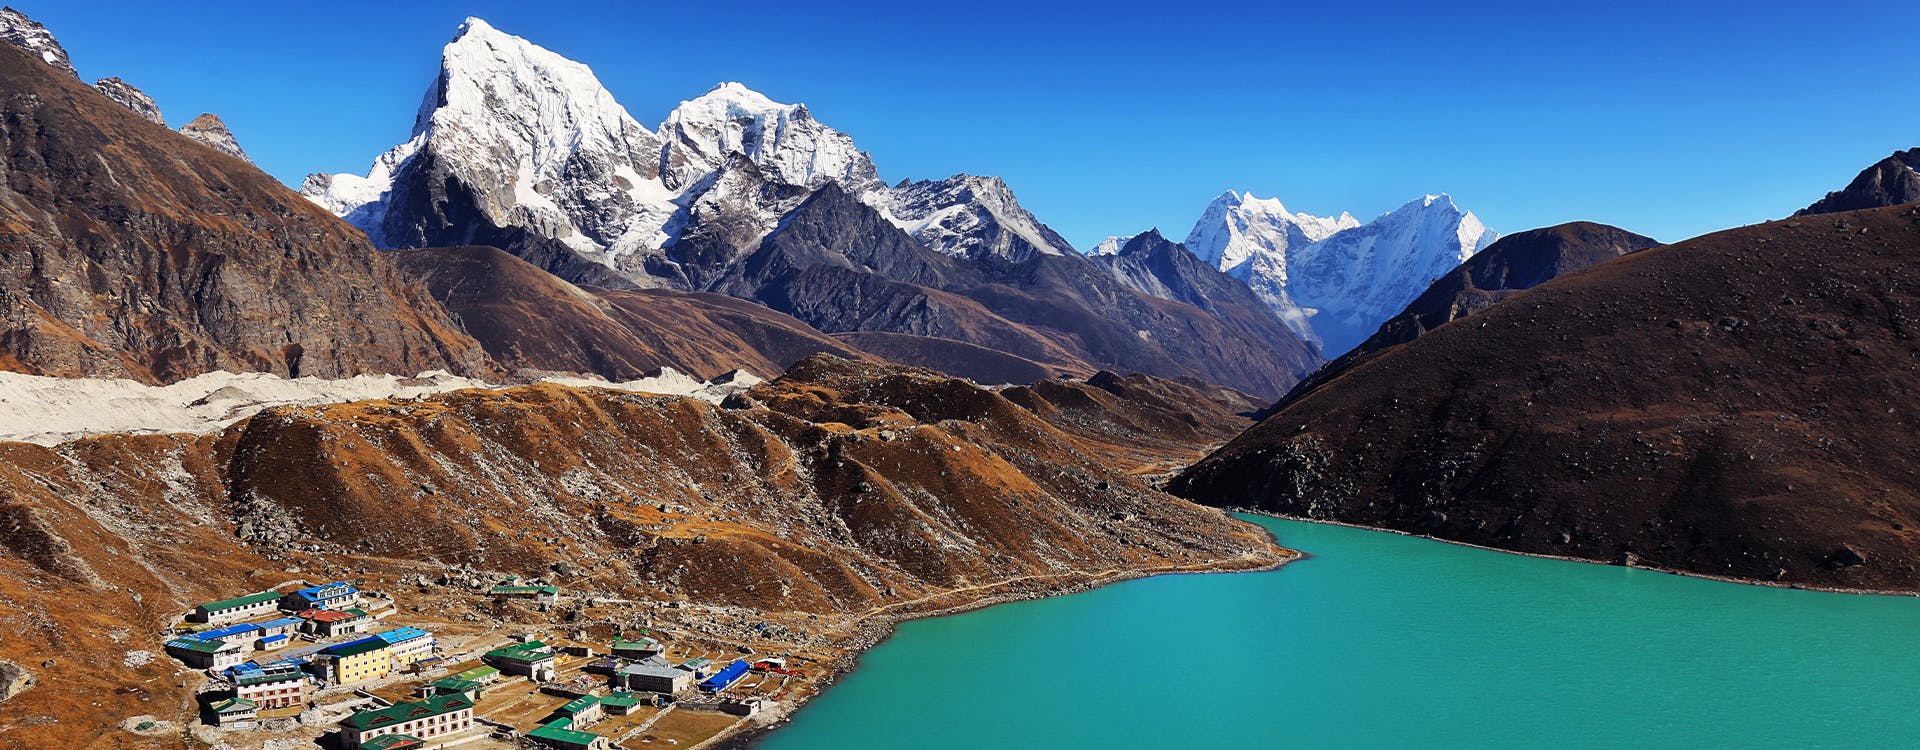 Everest view from gokyo lake